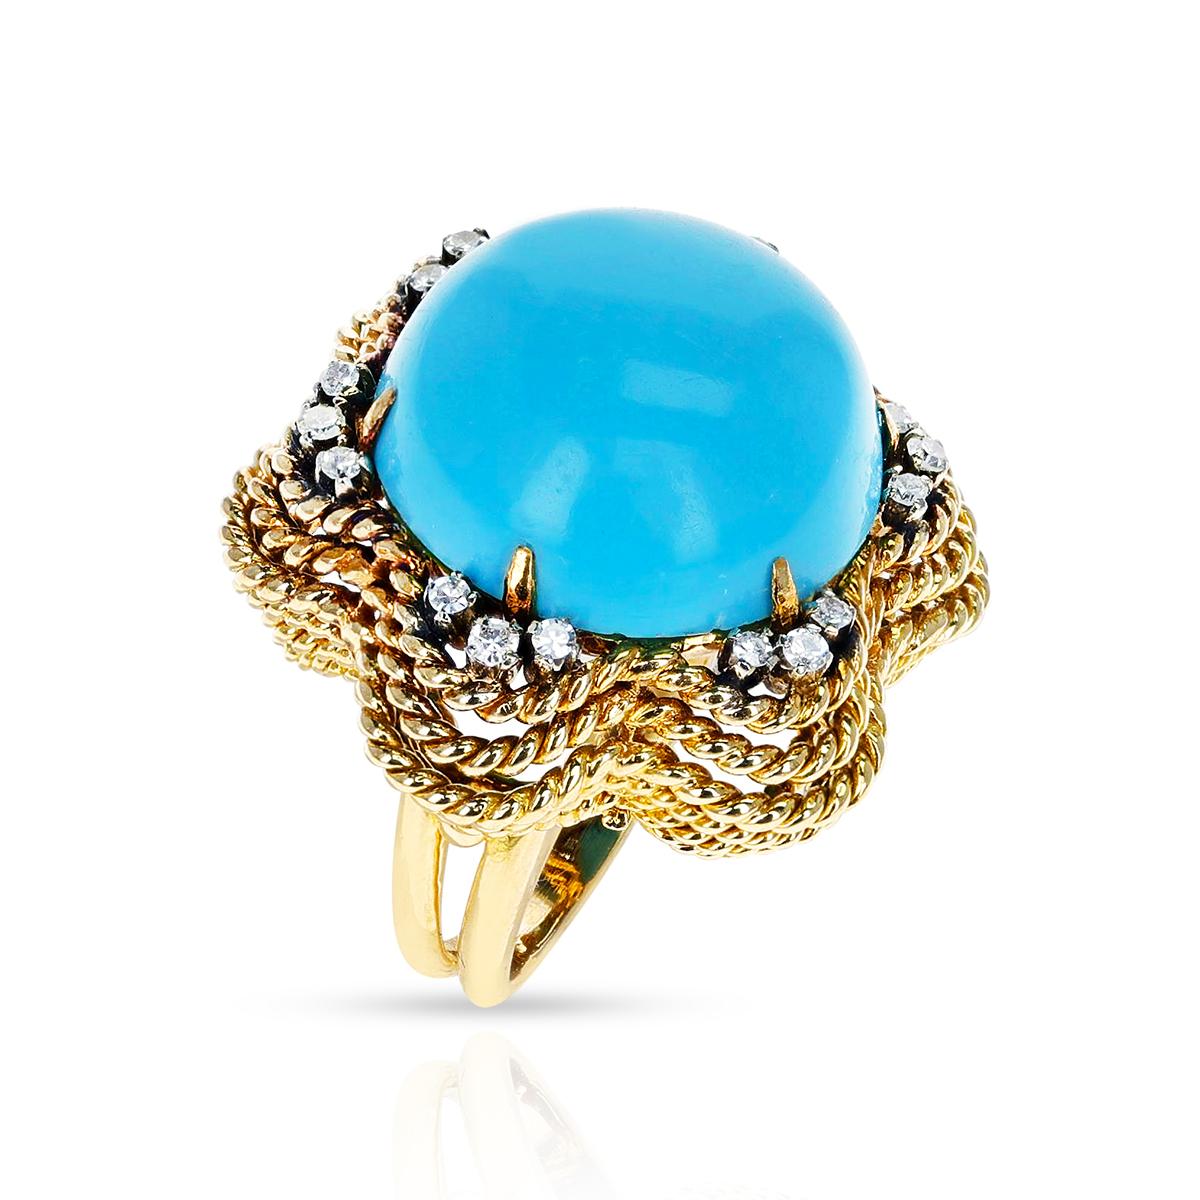 A 28 ct. Turquoise and Diamond Cocktail Ring made in 18 Karat Yellow Gold. The total weight of the ring is 15.2 grams. The ring size is US 4. 